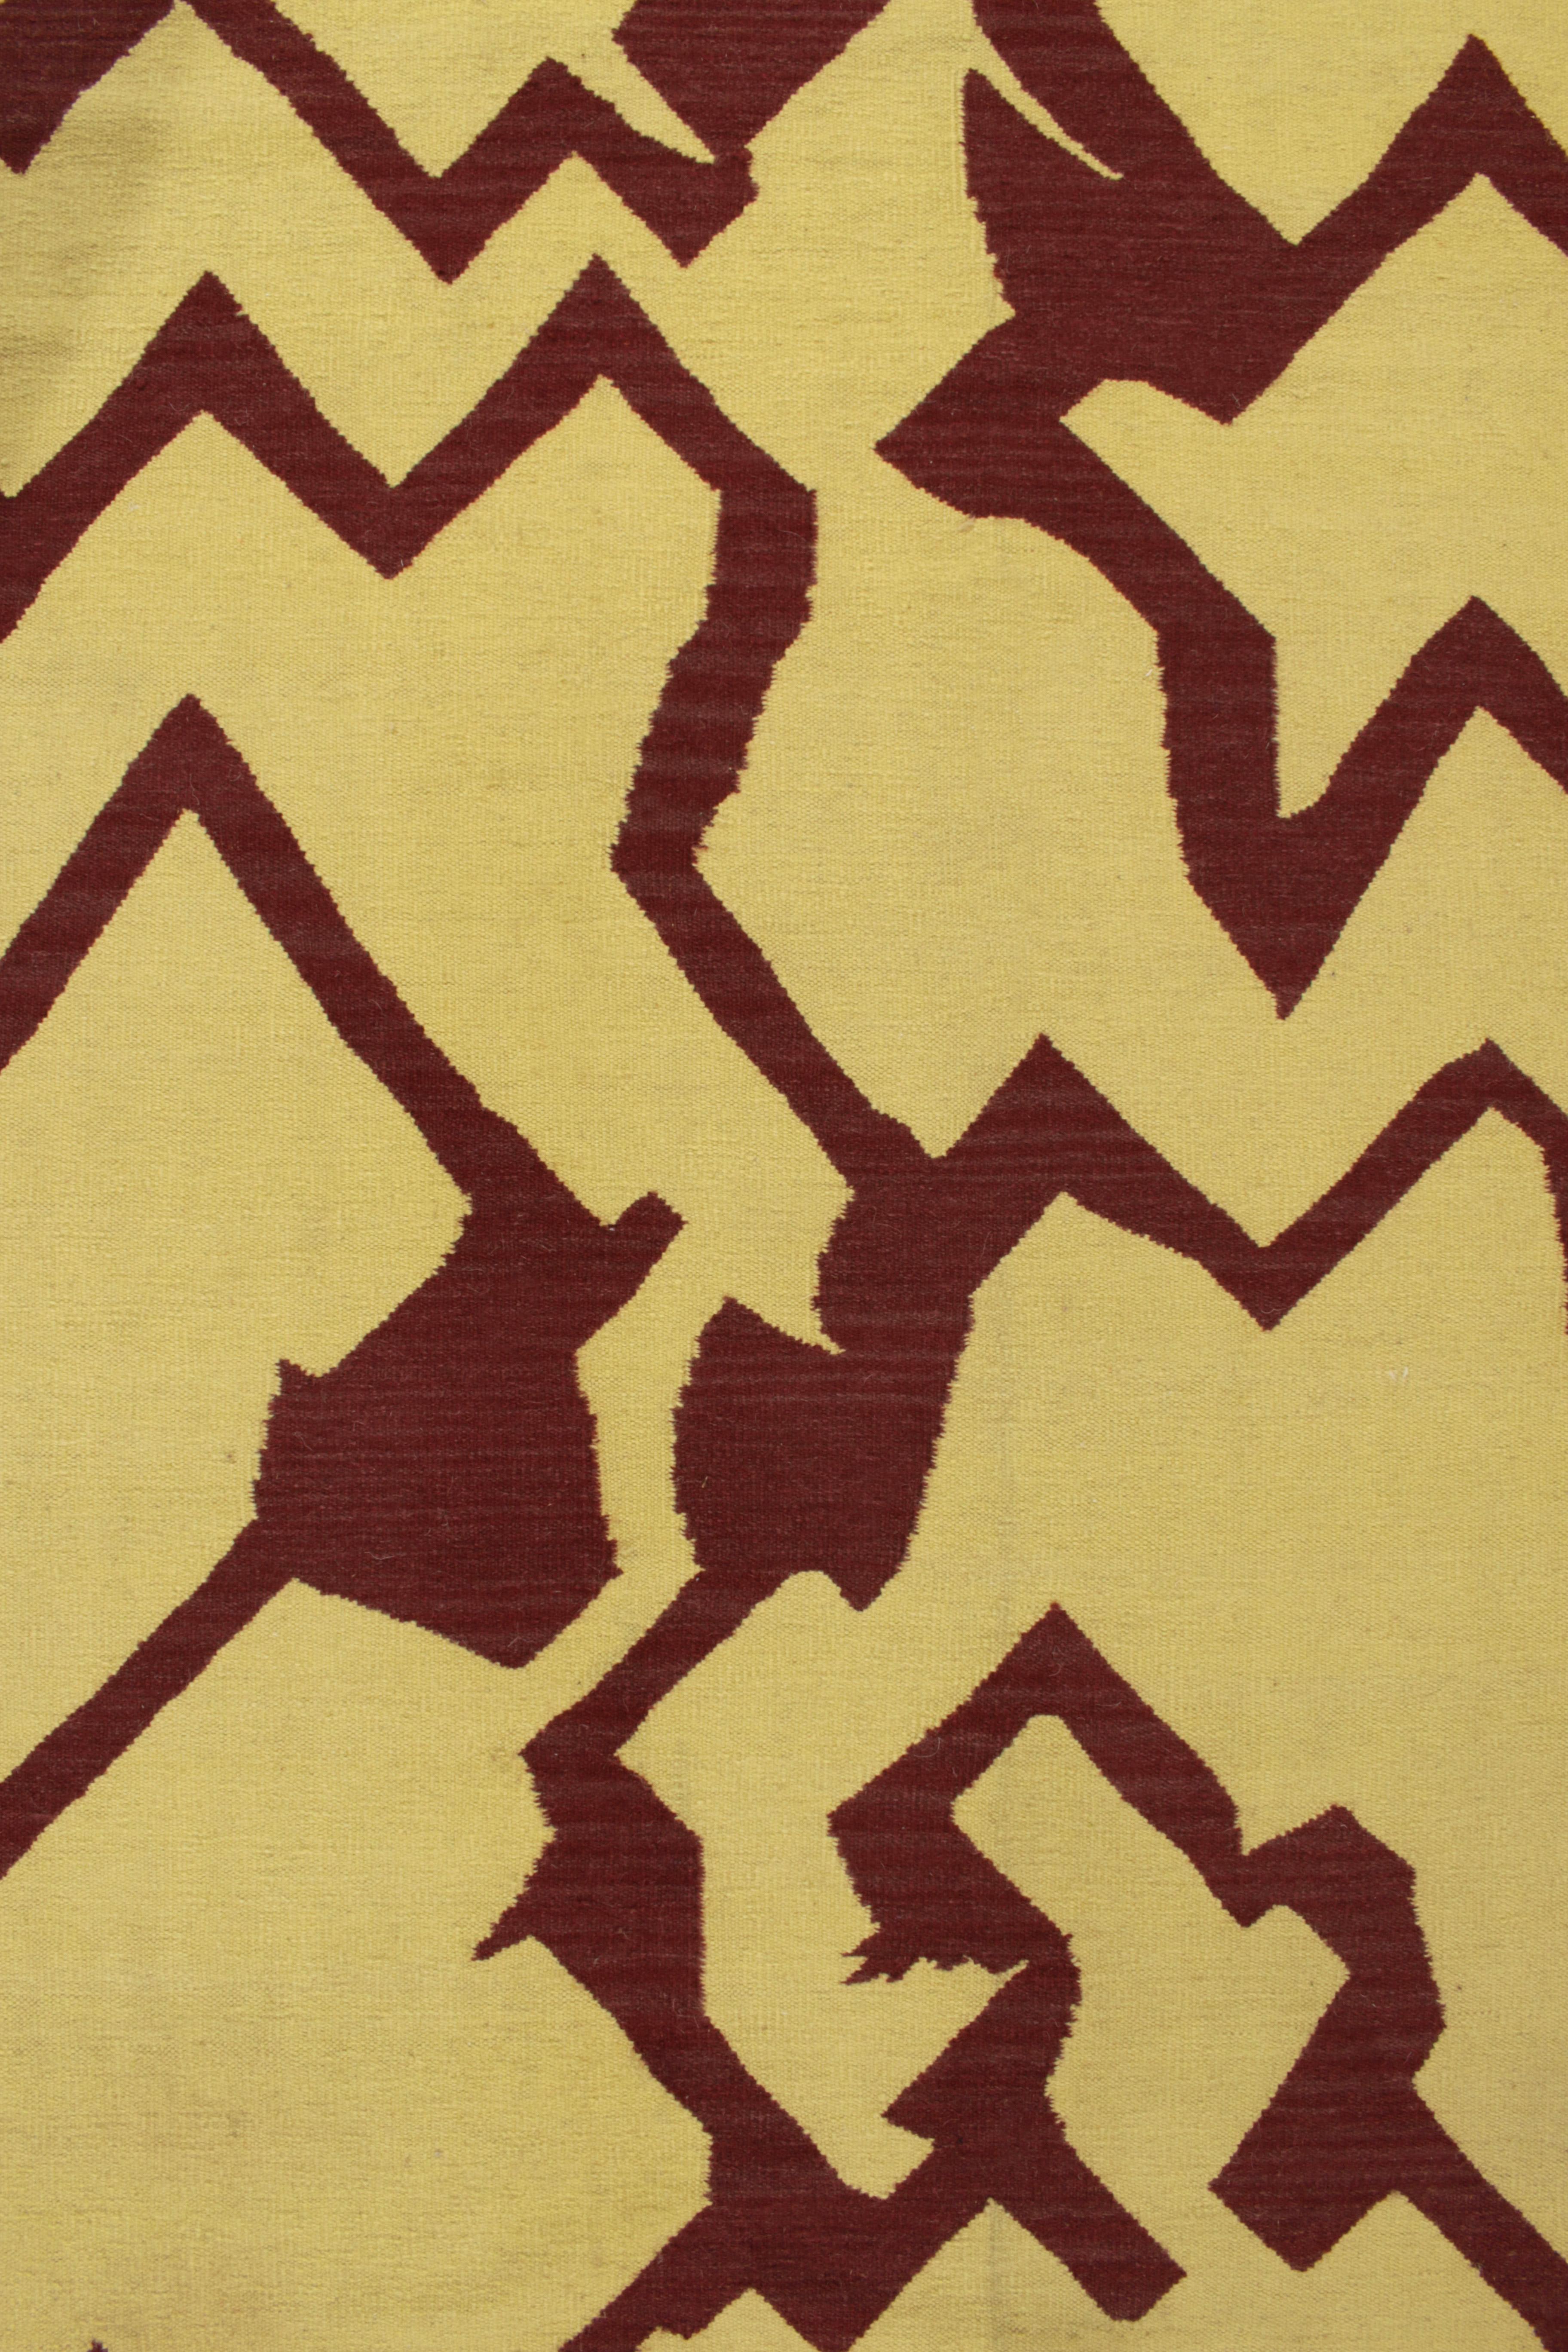 Hand-Knotted Rug & Kilim's Contemporary Dhurrie Flatweave, Yellow, Maroon Geometric Pattern For Sale